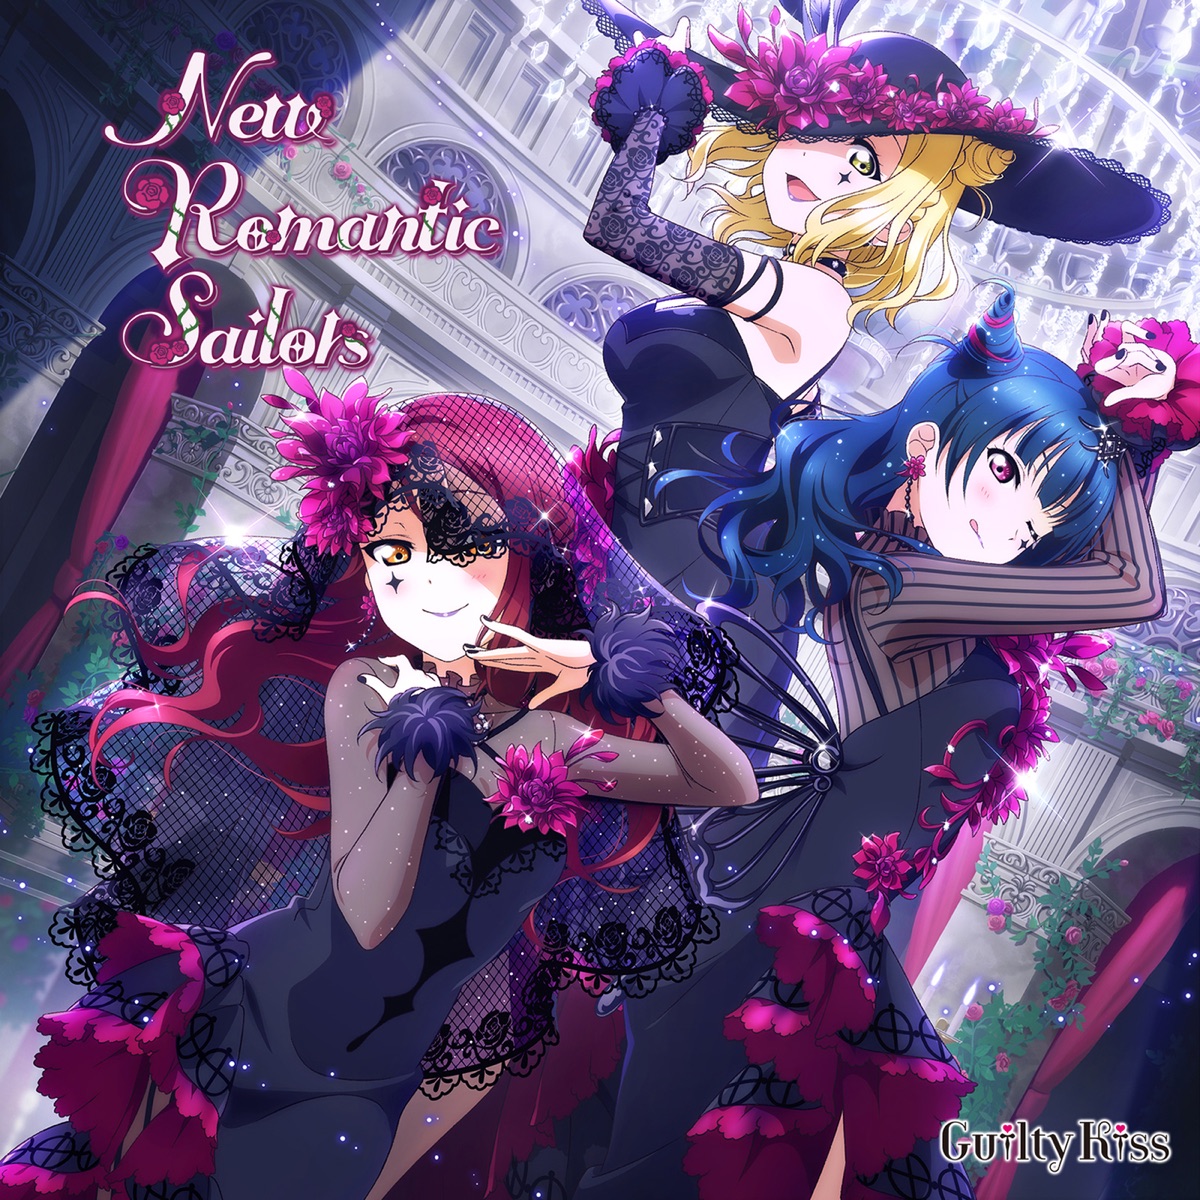 Cover art for『Guilty Kiss - Love Pulsar』from the release『New Romantic Sailors